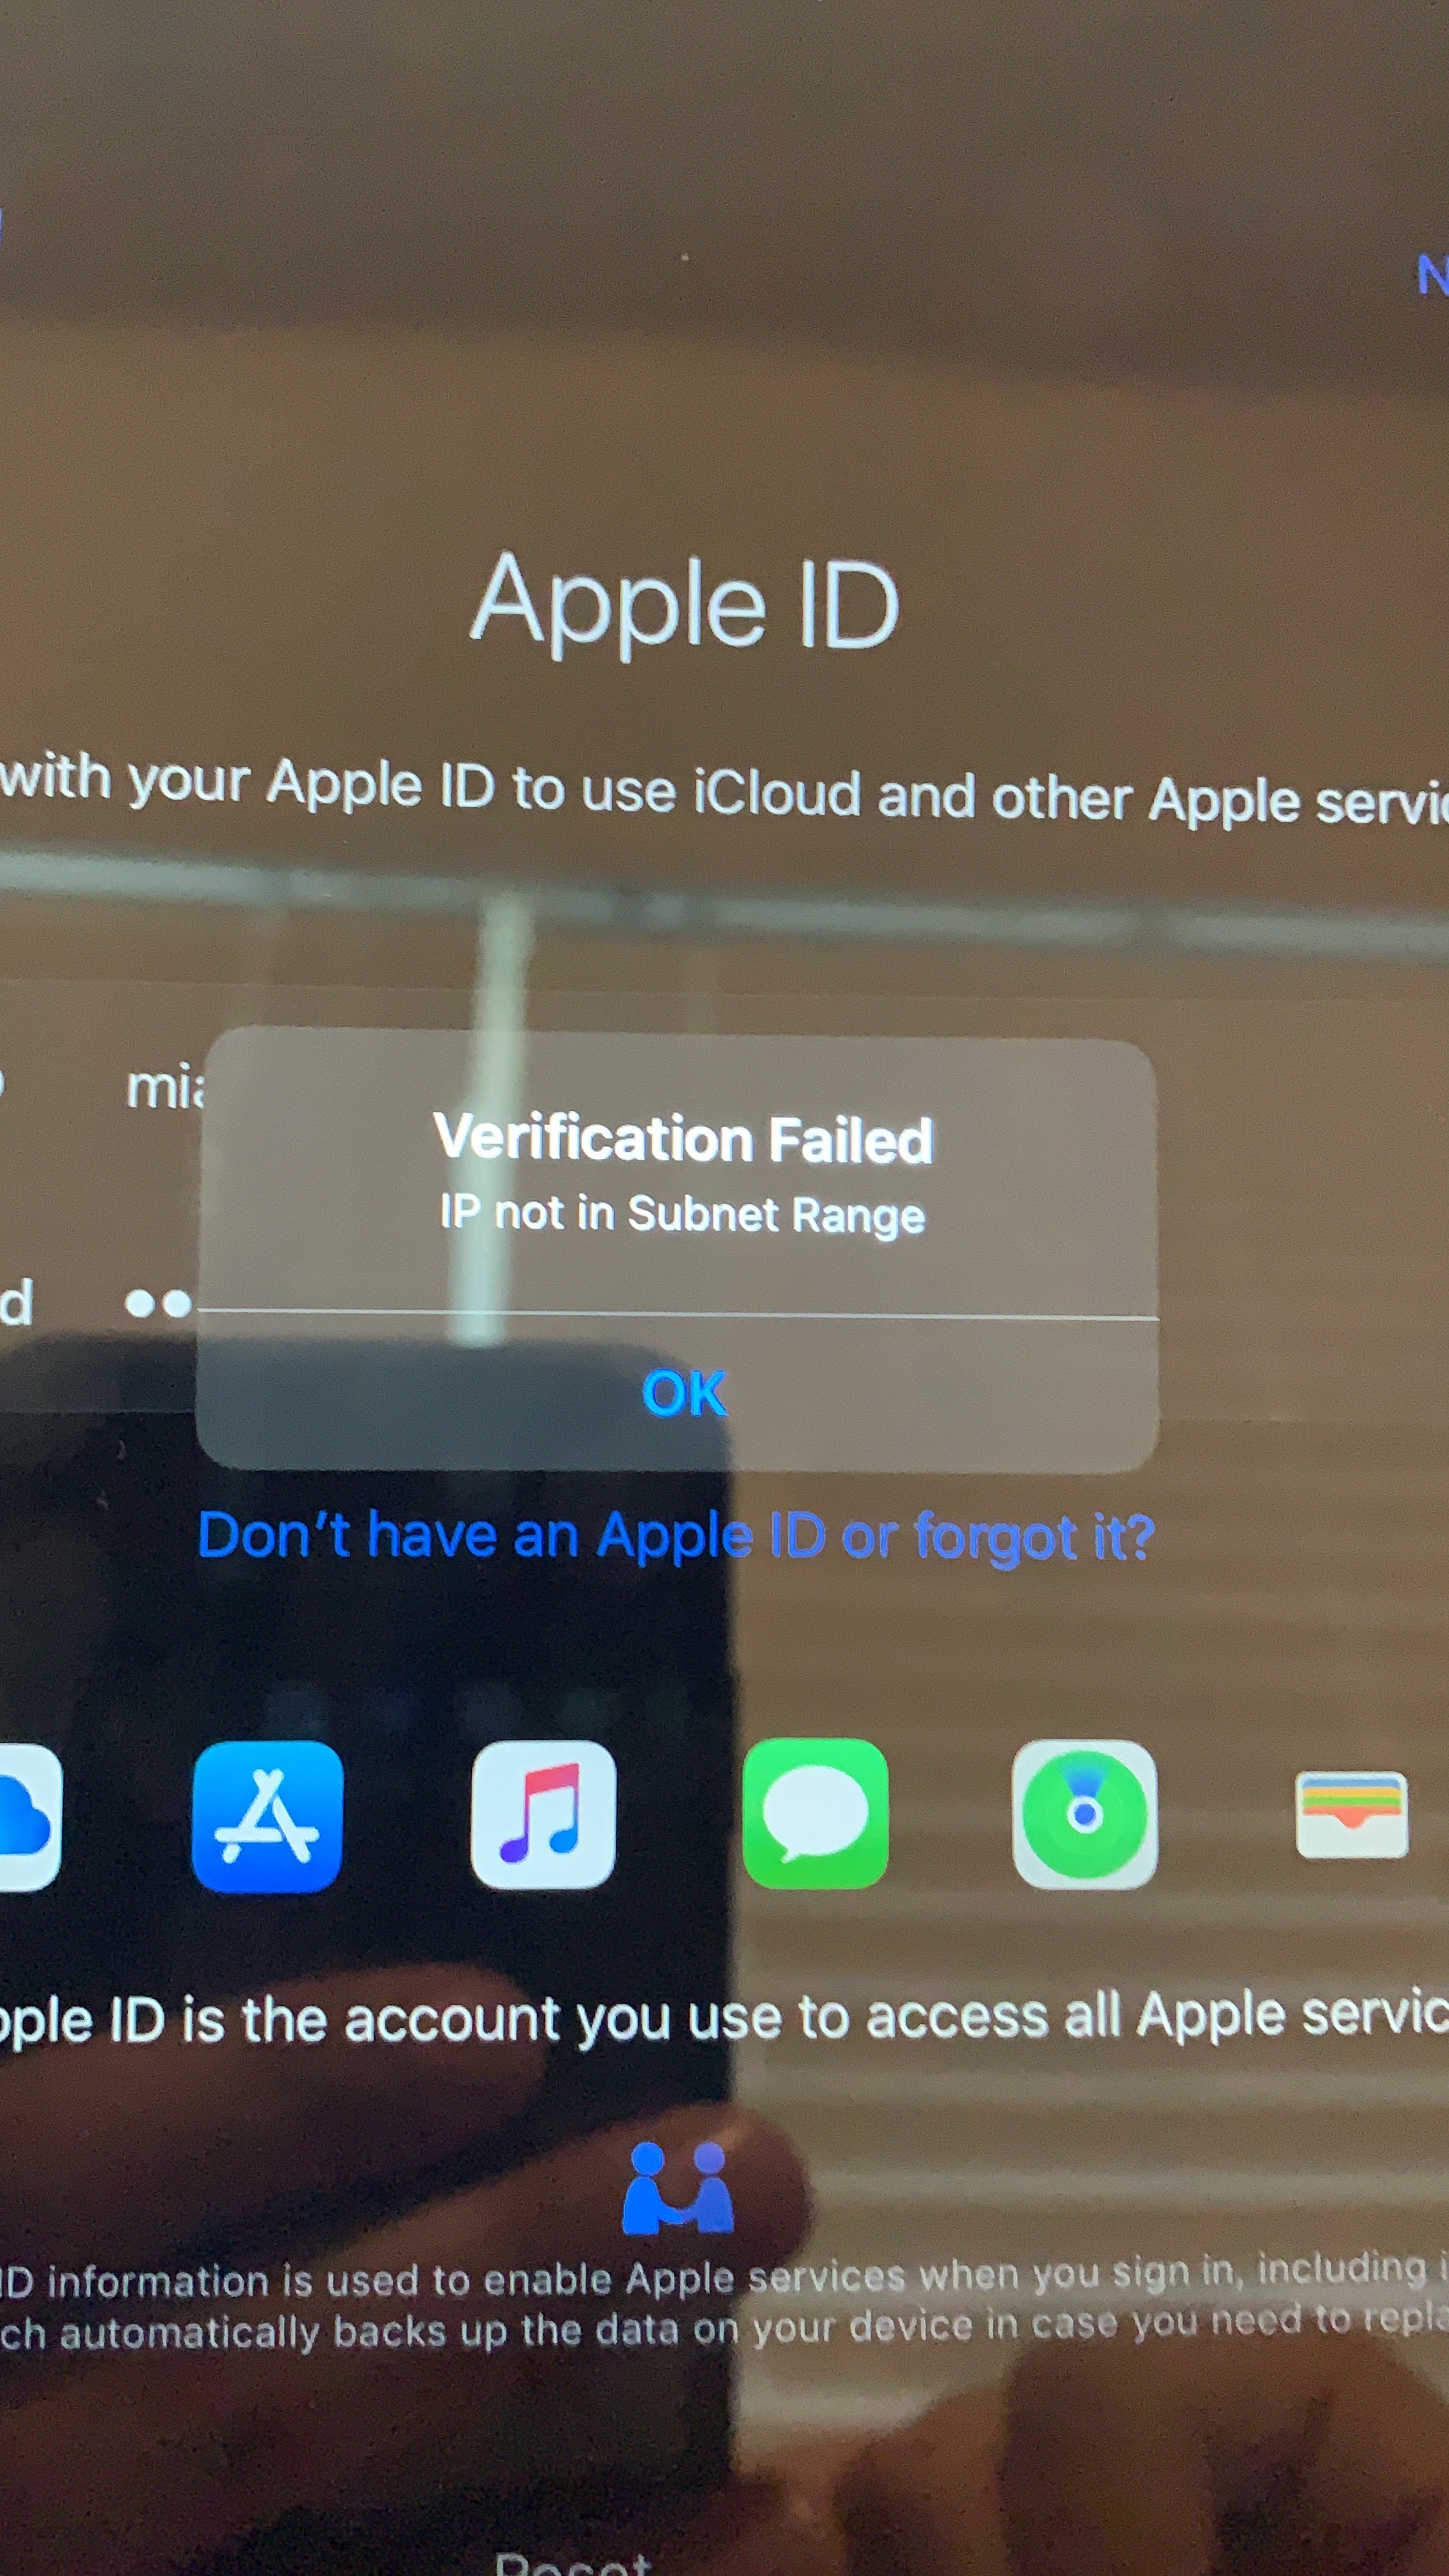 why wont my phone connect to apple id server